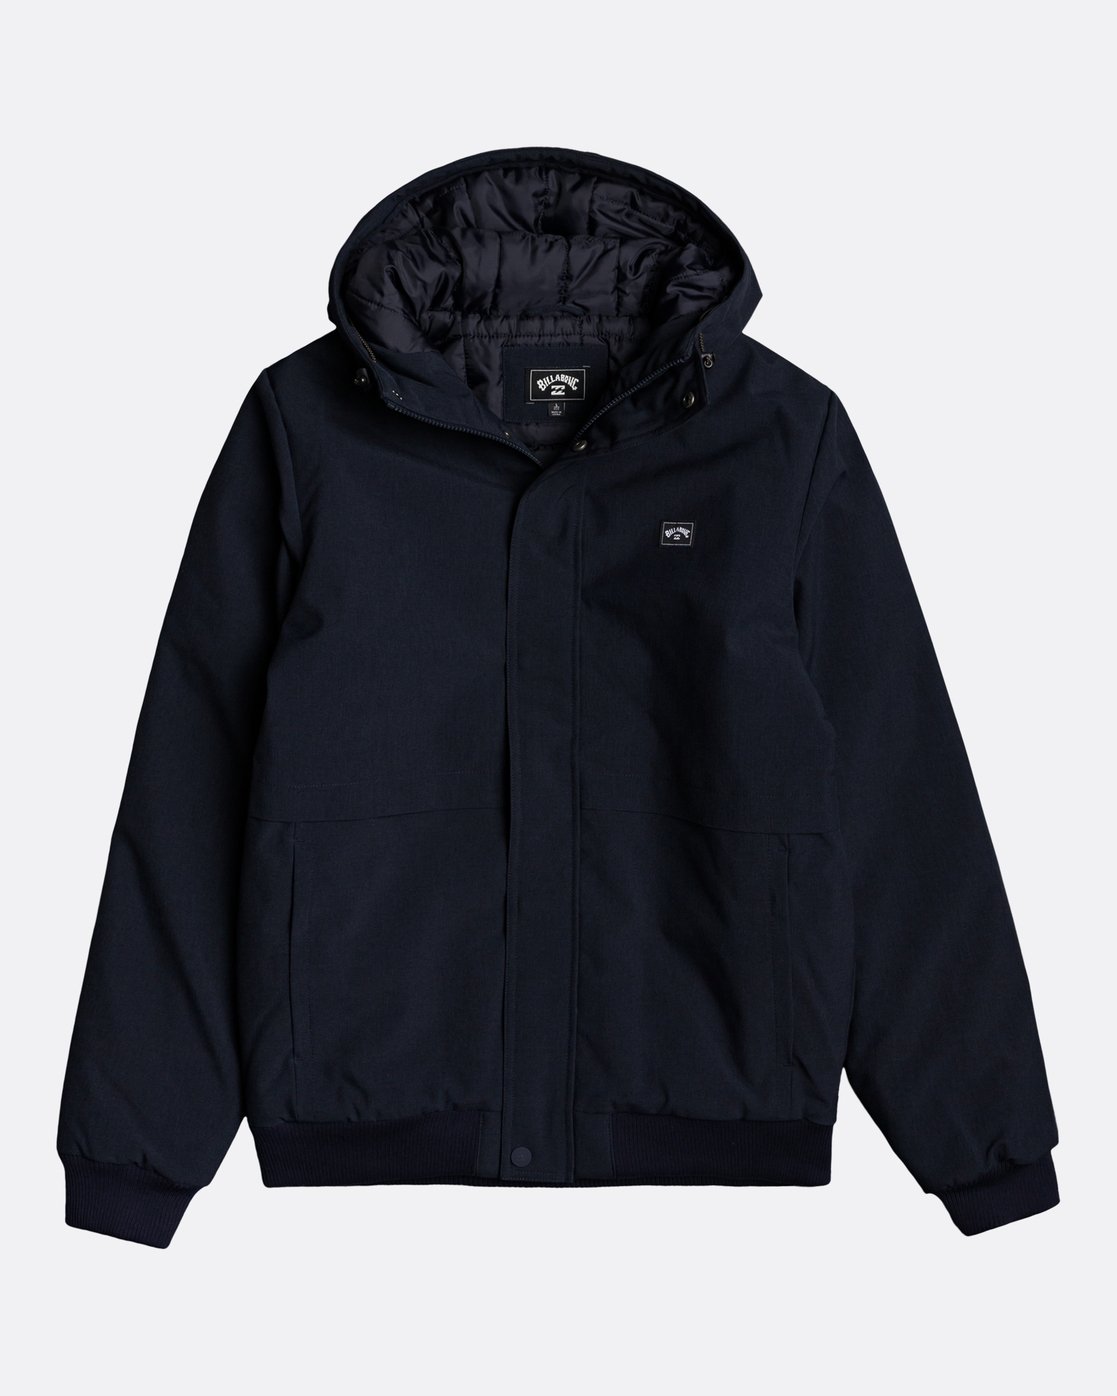 CHAQUETON CAPUCHA  ALL DAY JACKET 100% POLYESTER NAVY HEATHER